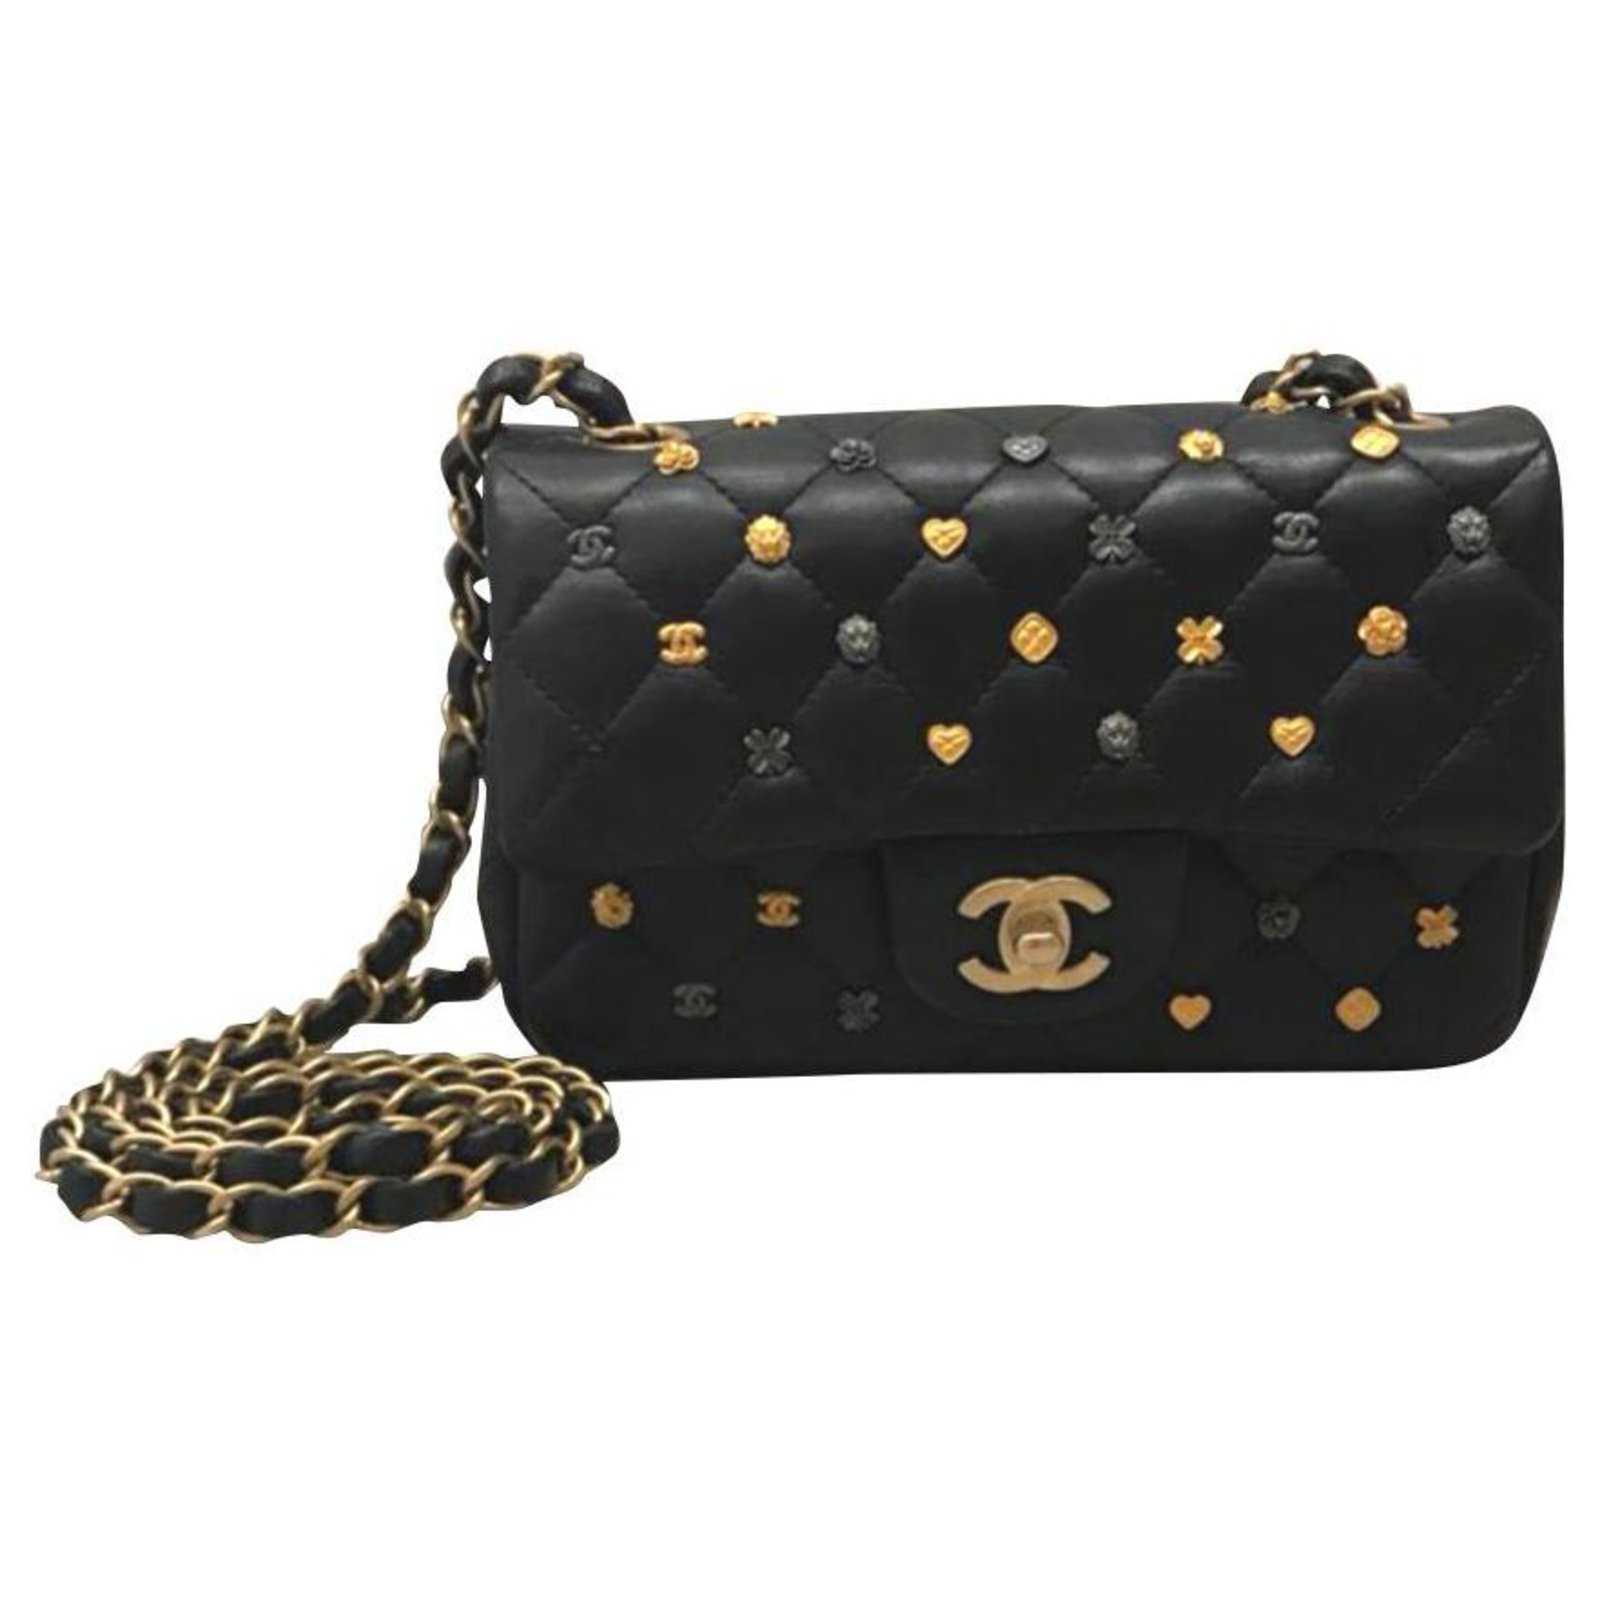 Limited edition Chanel mini lucky charms flap bag.